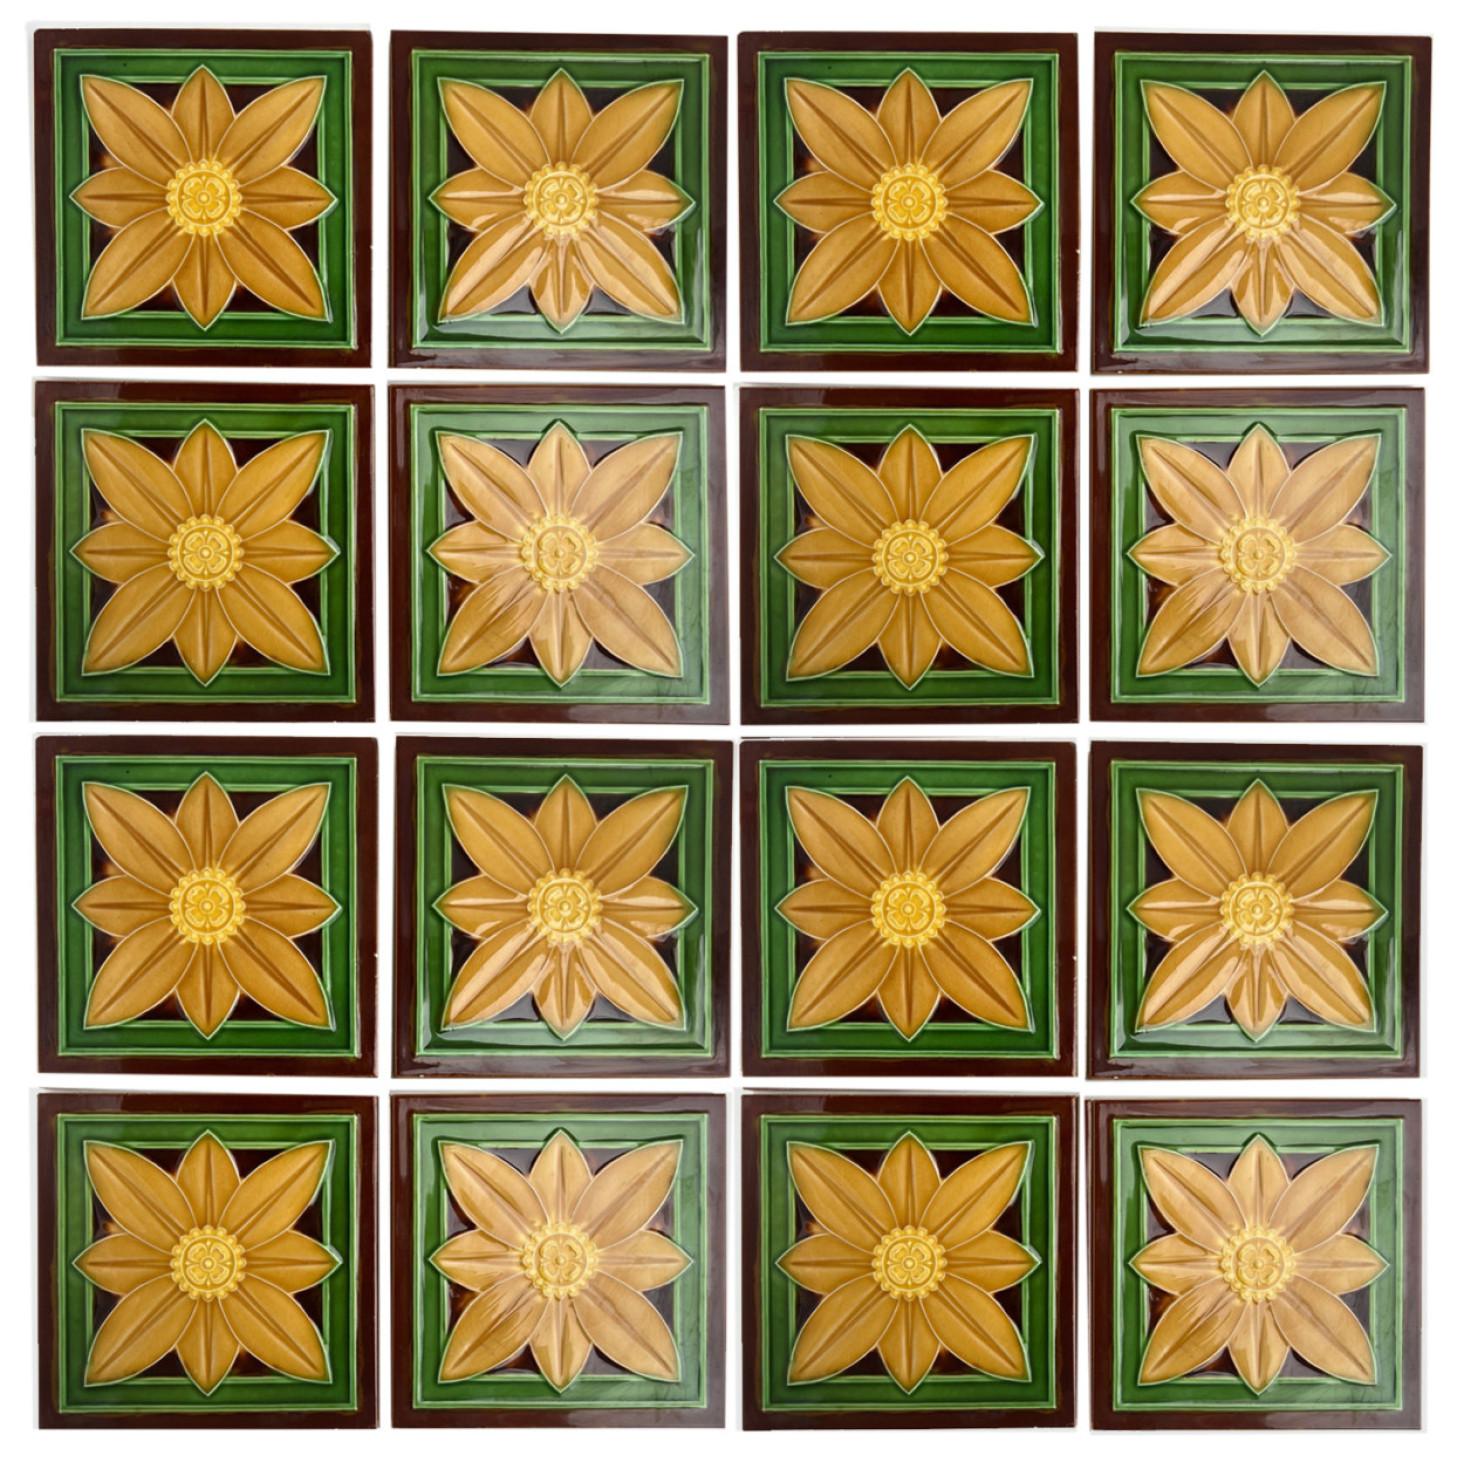 1 of the 40 handmade tiles in rich yellow, green and brown glazed colors. Manufactured around 1920 by Gilliot Hemiksem, Belgium.
These tiles would be charming displayed on easels, framed or incorporated into a custom tile design.

Please note that